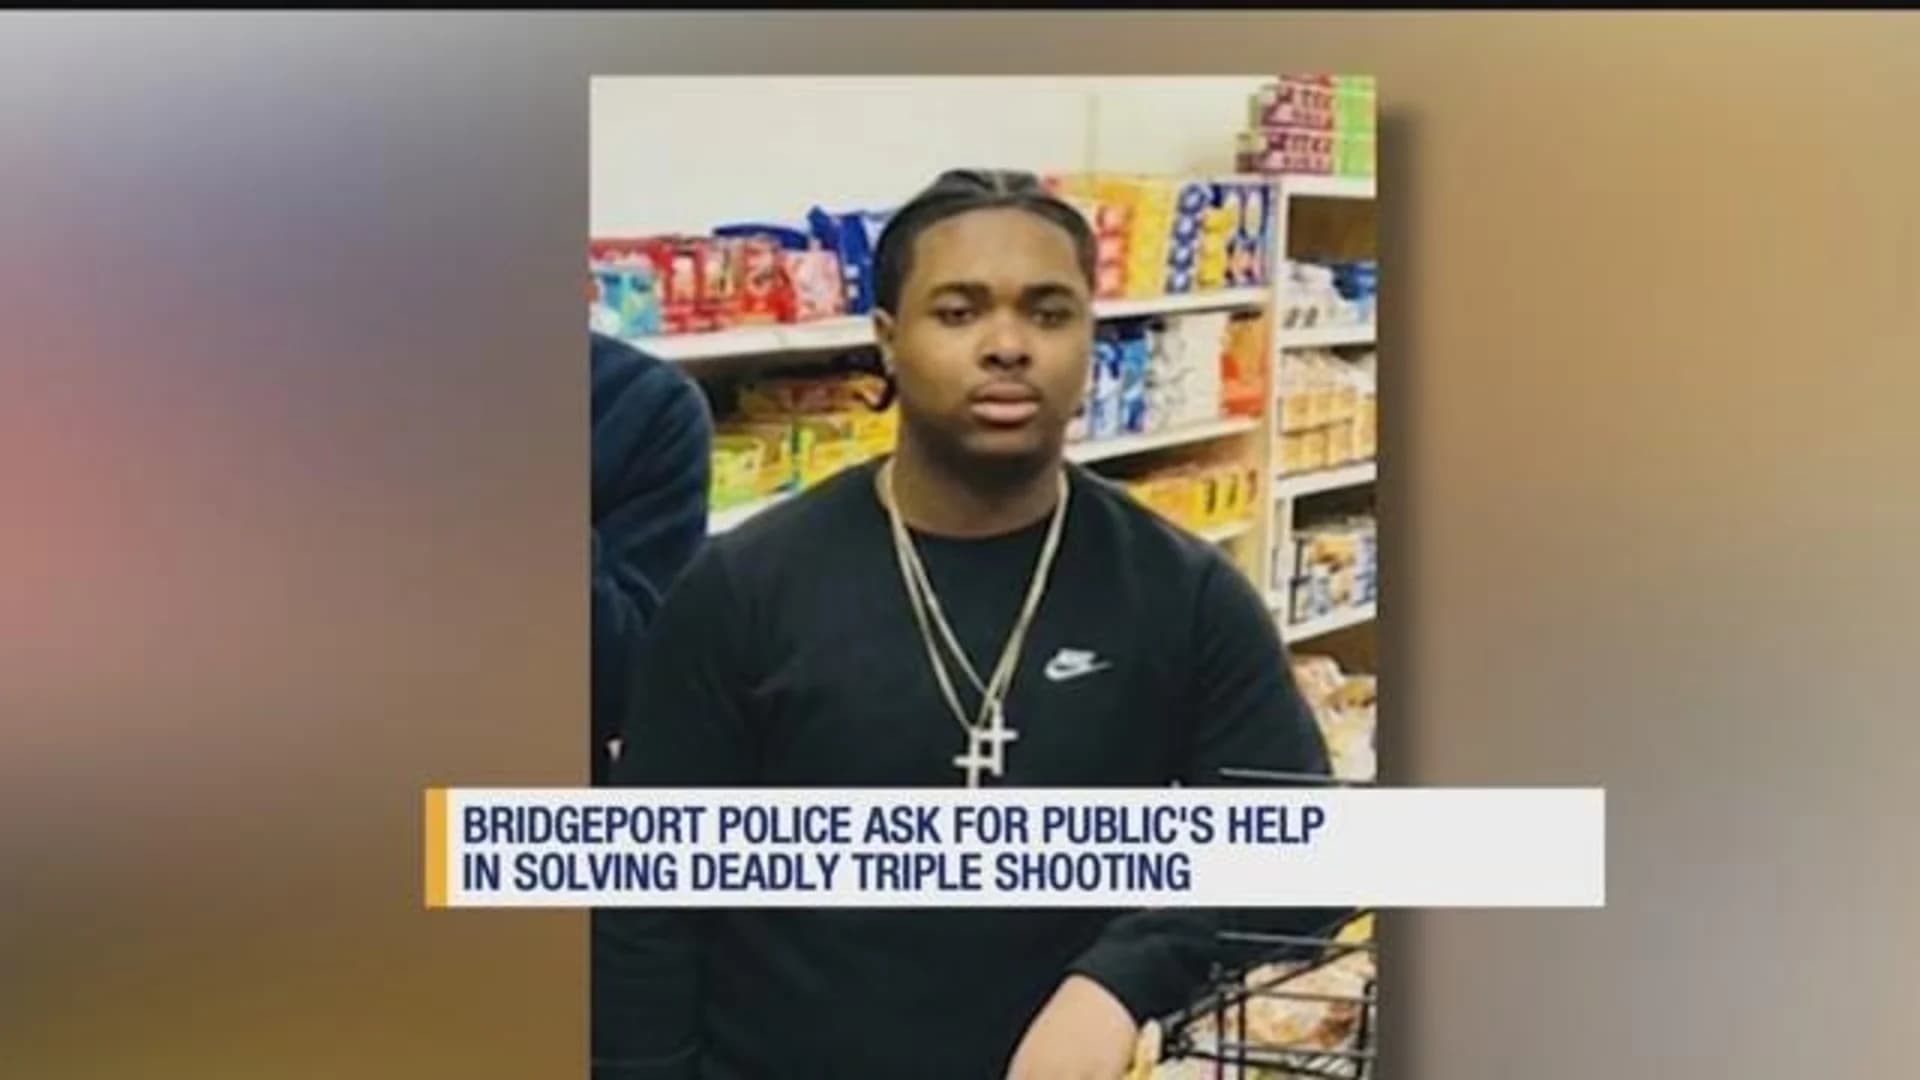 Police, family plead for public’s help to find gunman in triple shooting